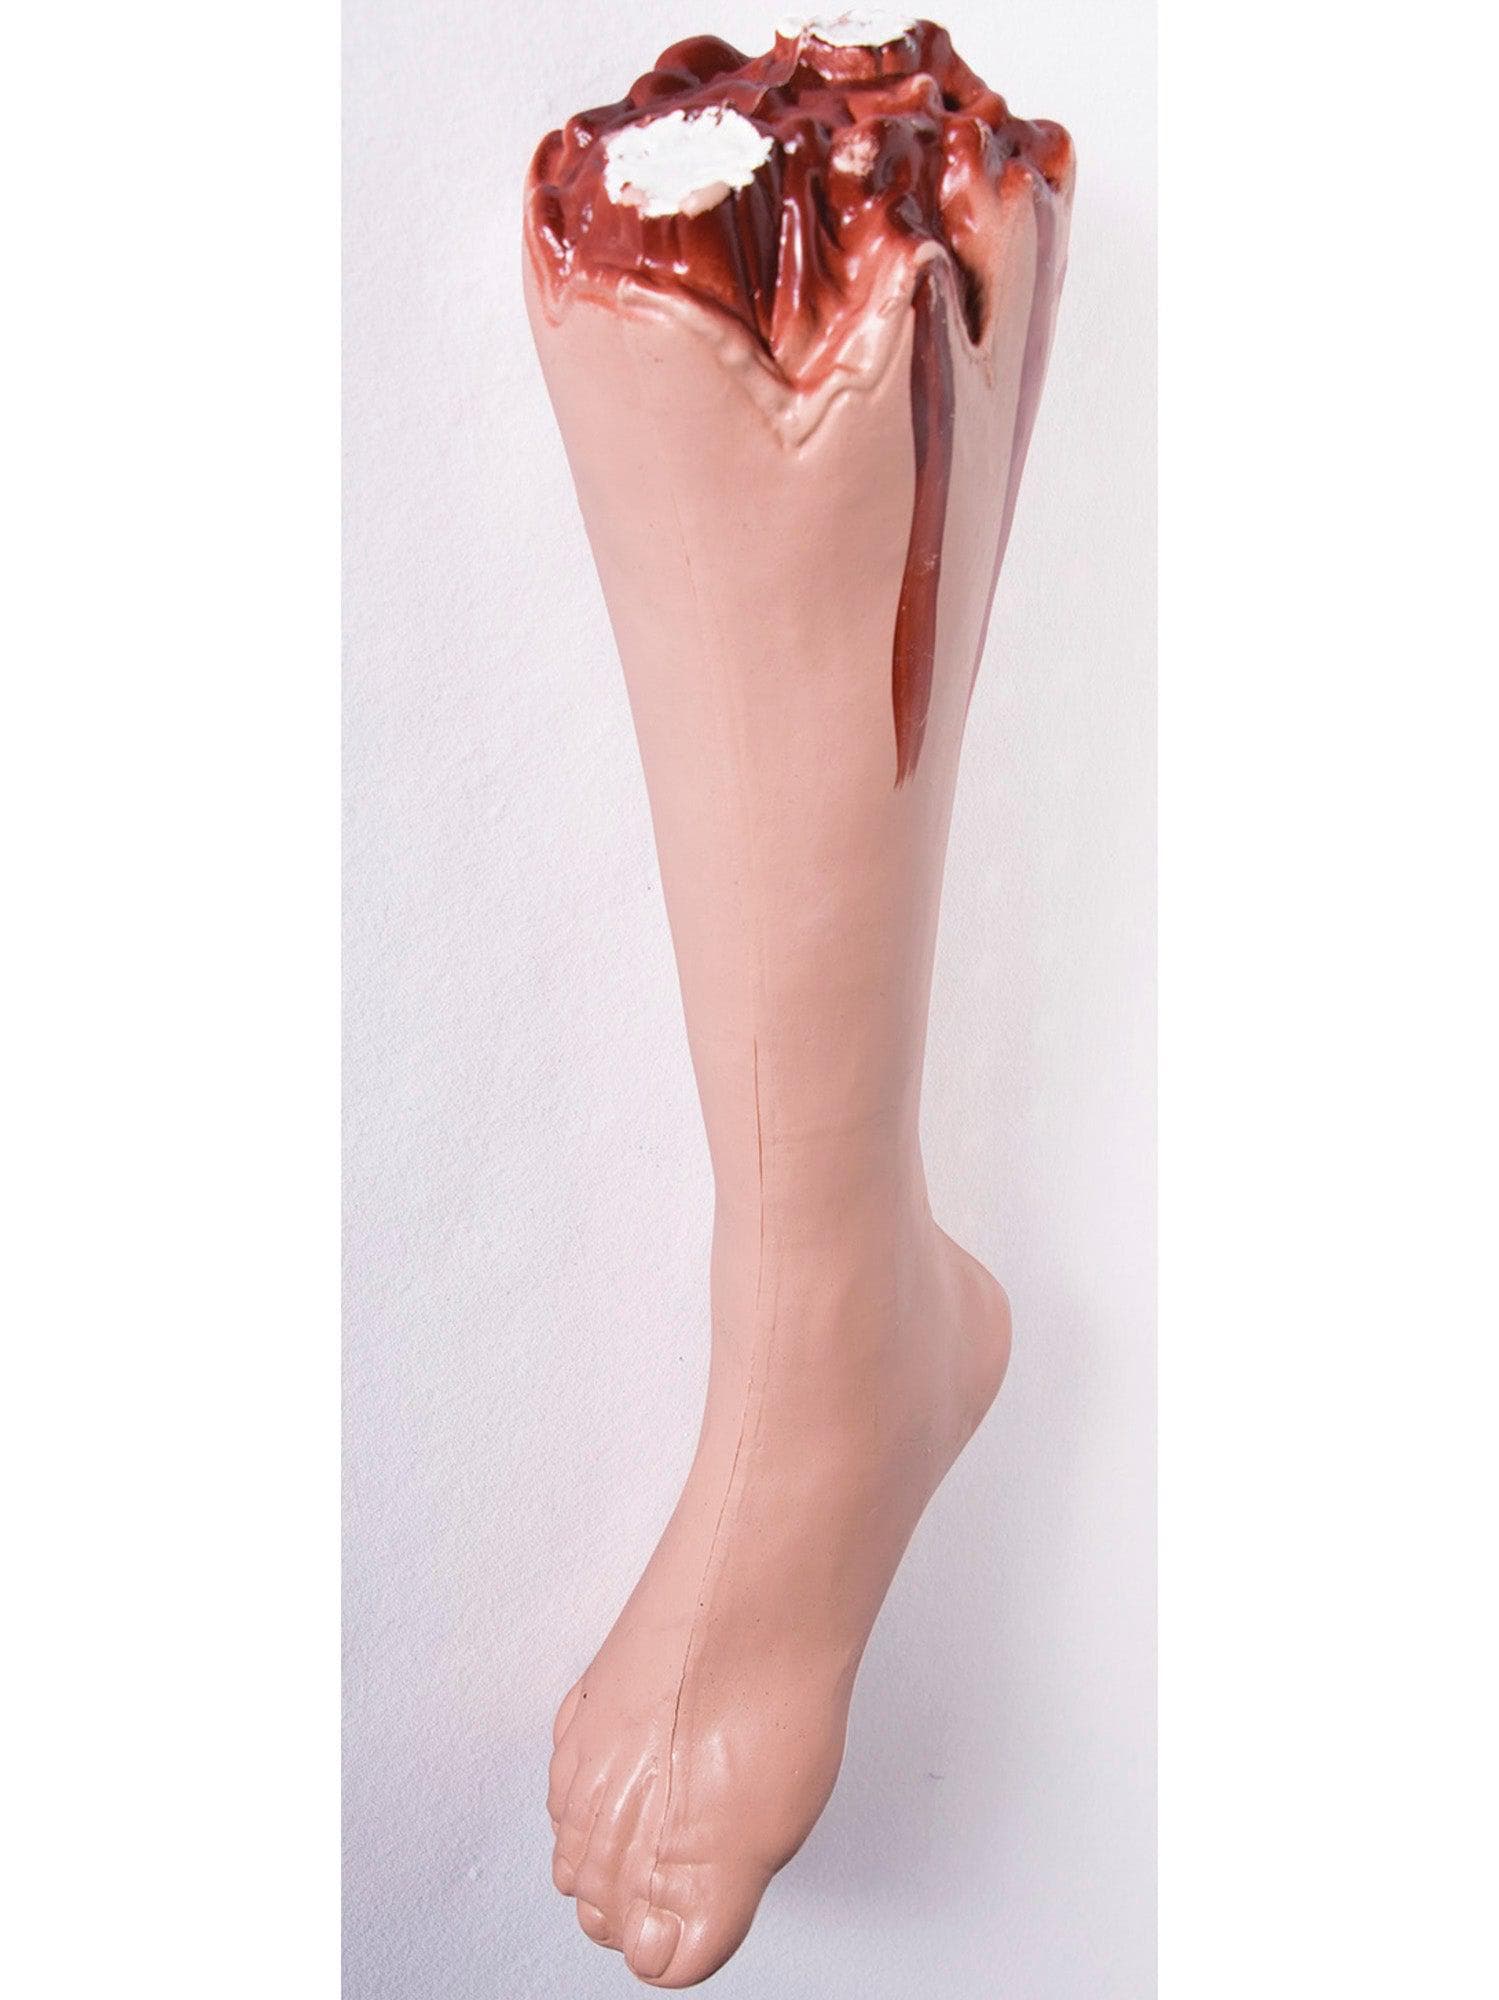 18-inch Bloody Severed Leg Prop - costumes.com